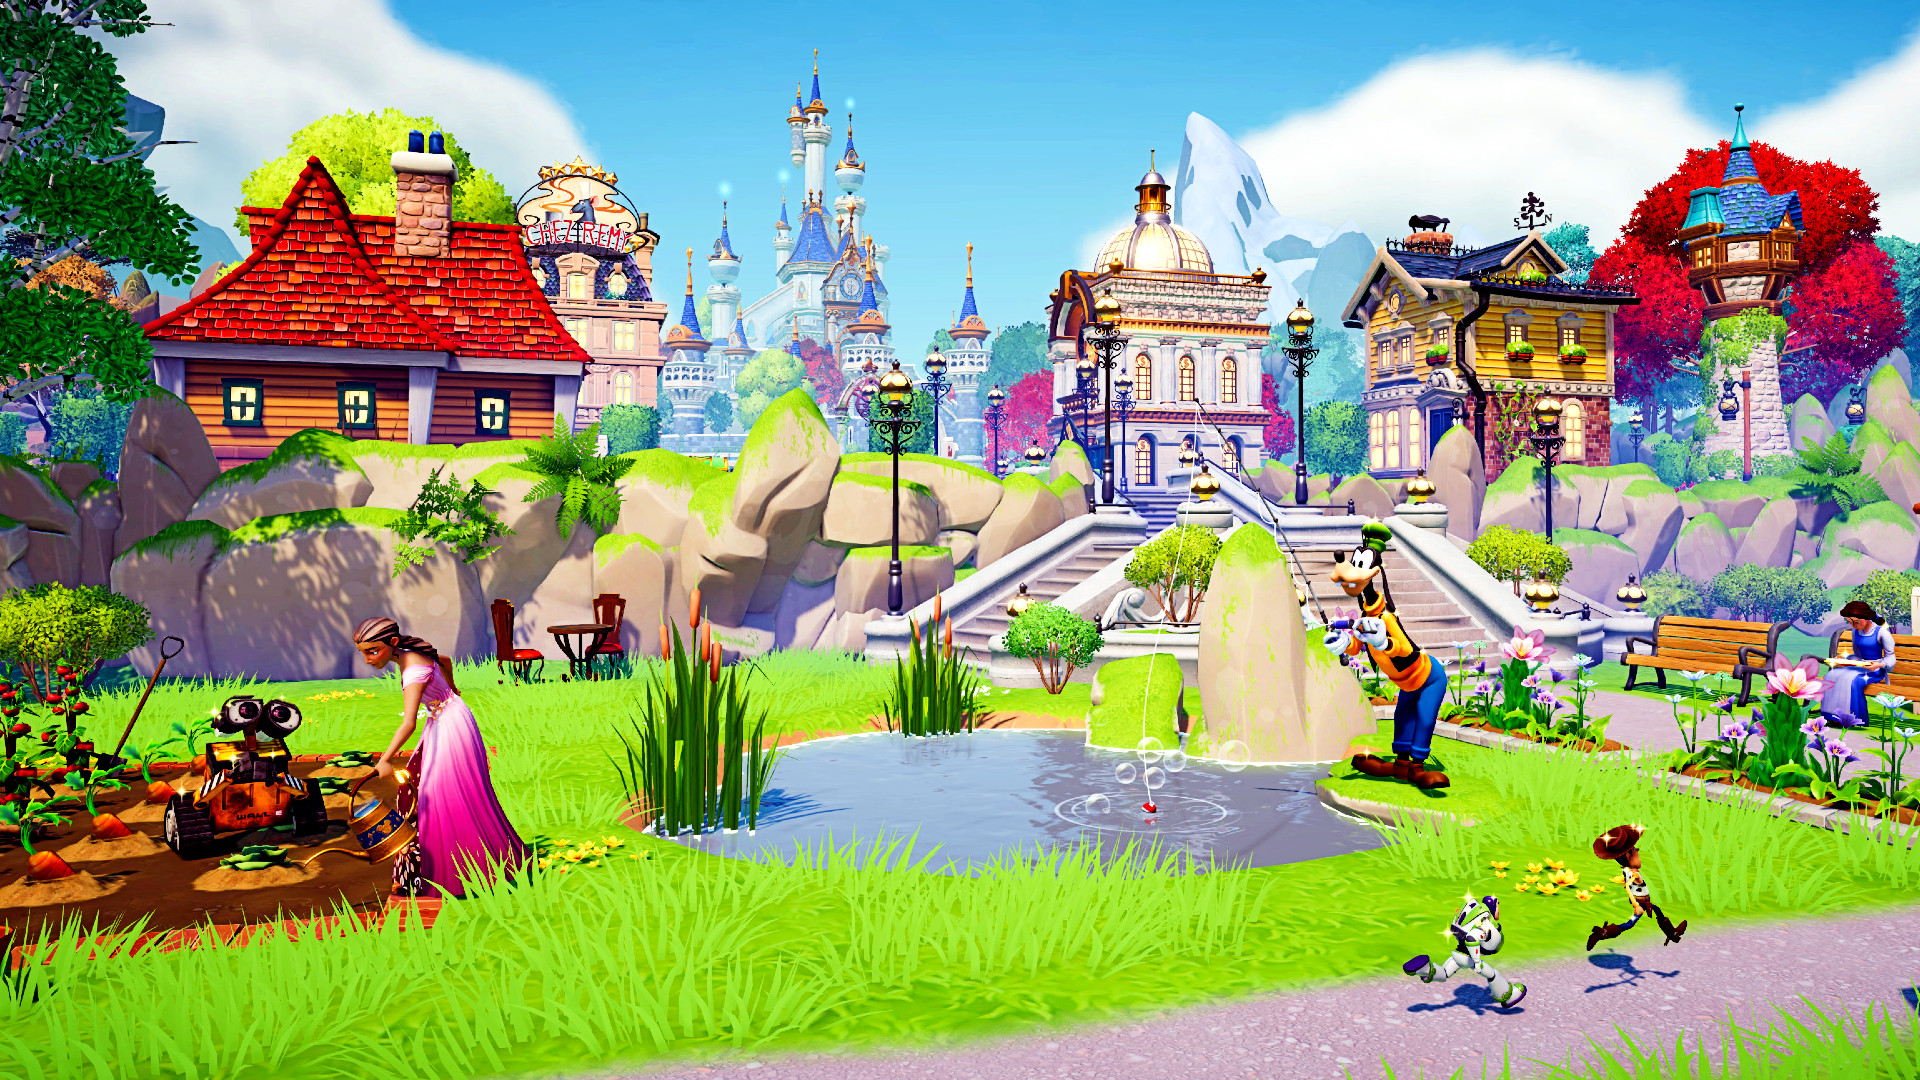 Disney Dreamlight Valley - a colourful Disney kingdom featuring several Disney characters going about their business